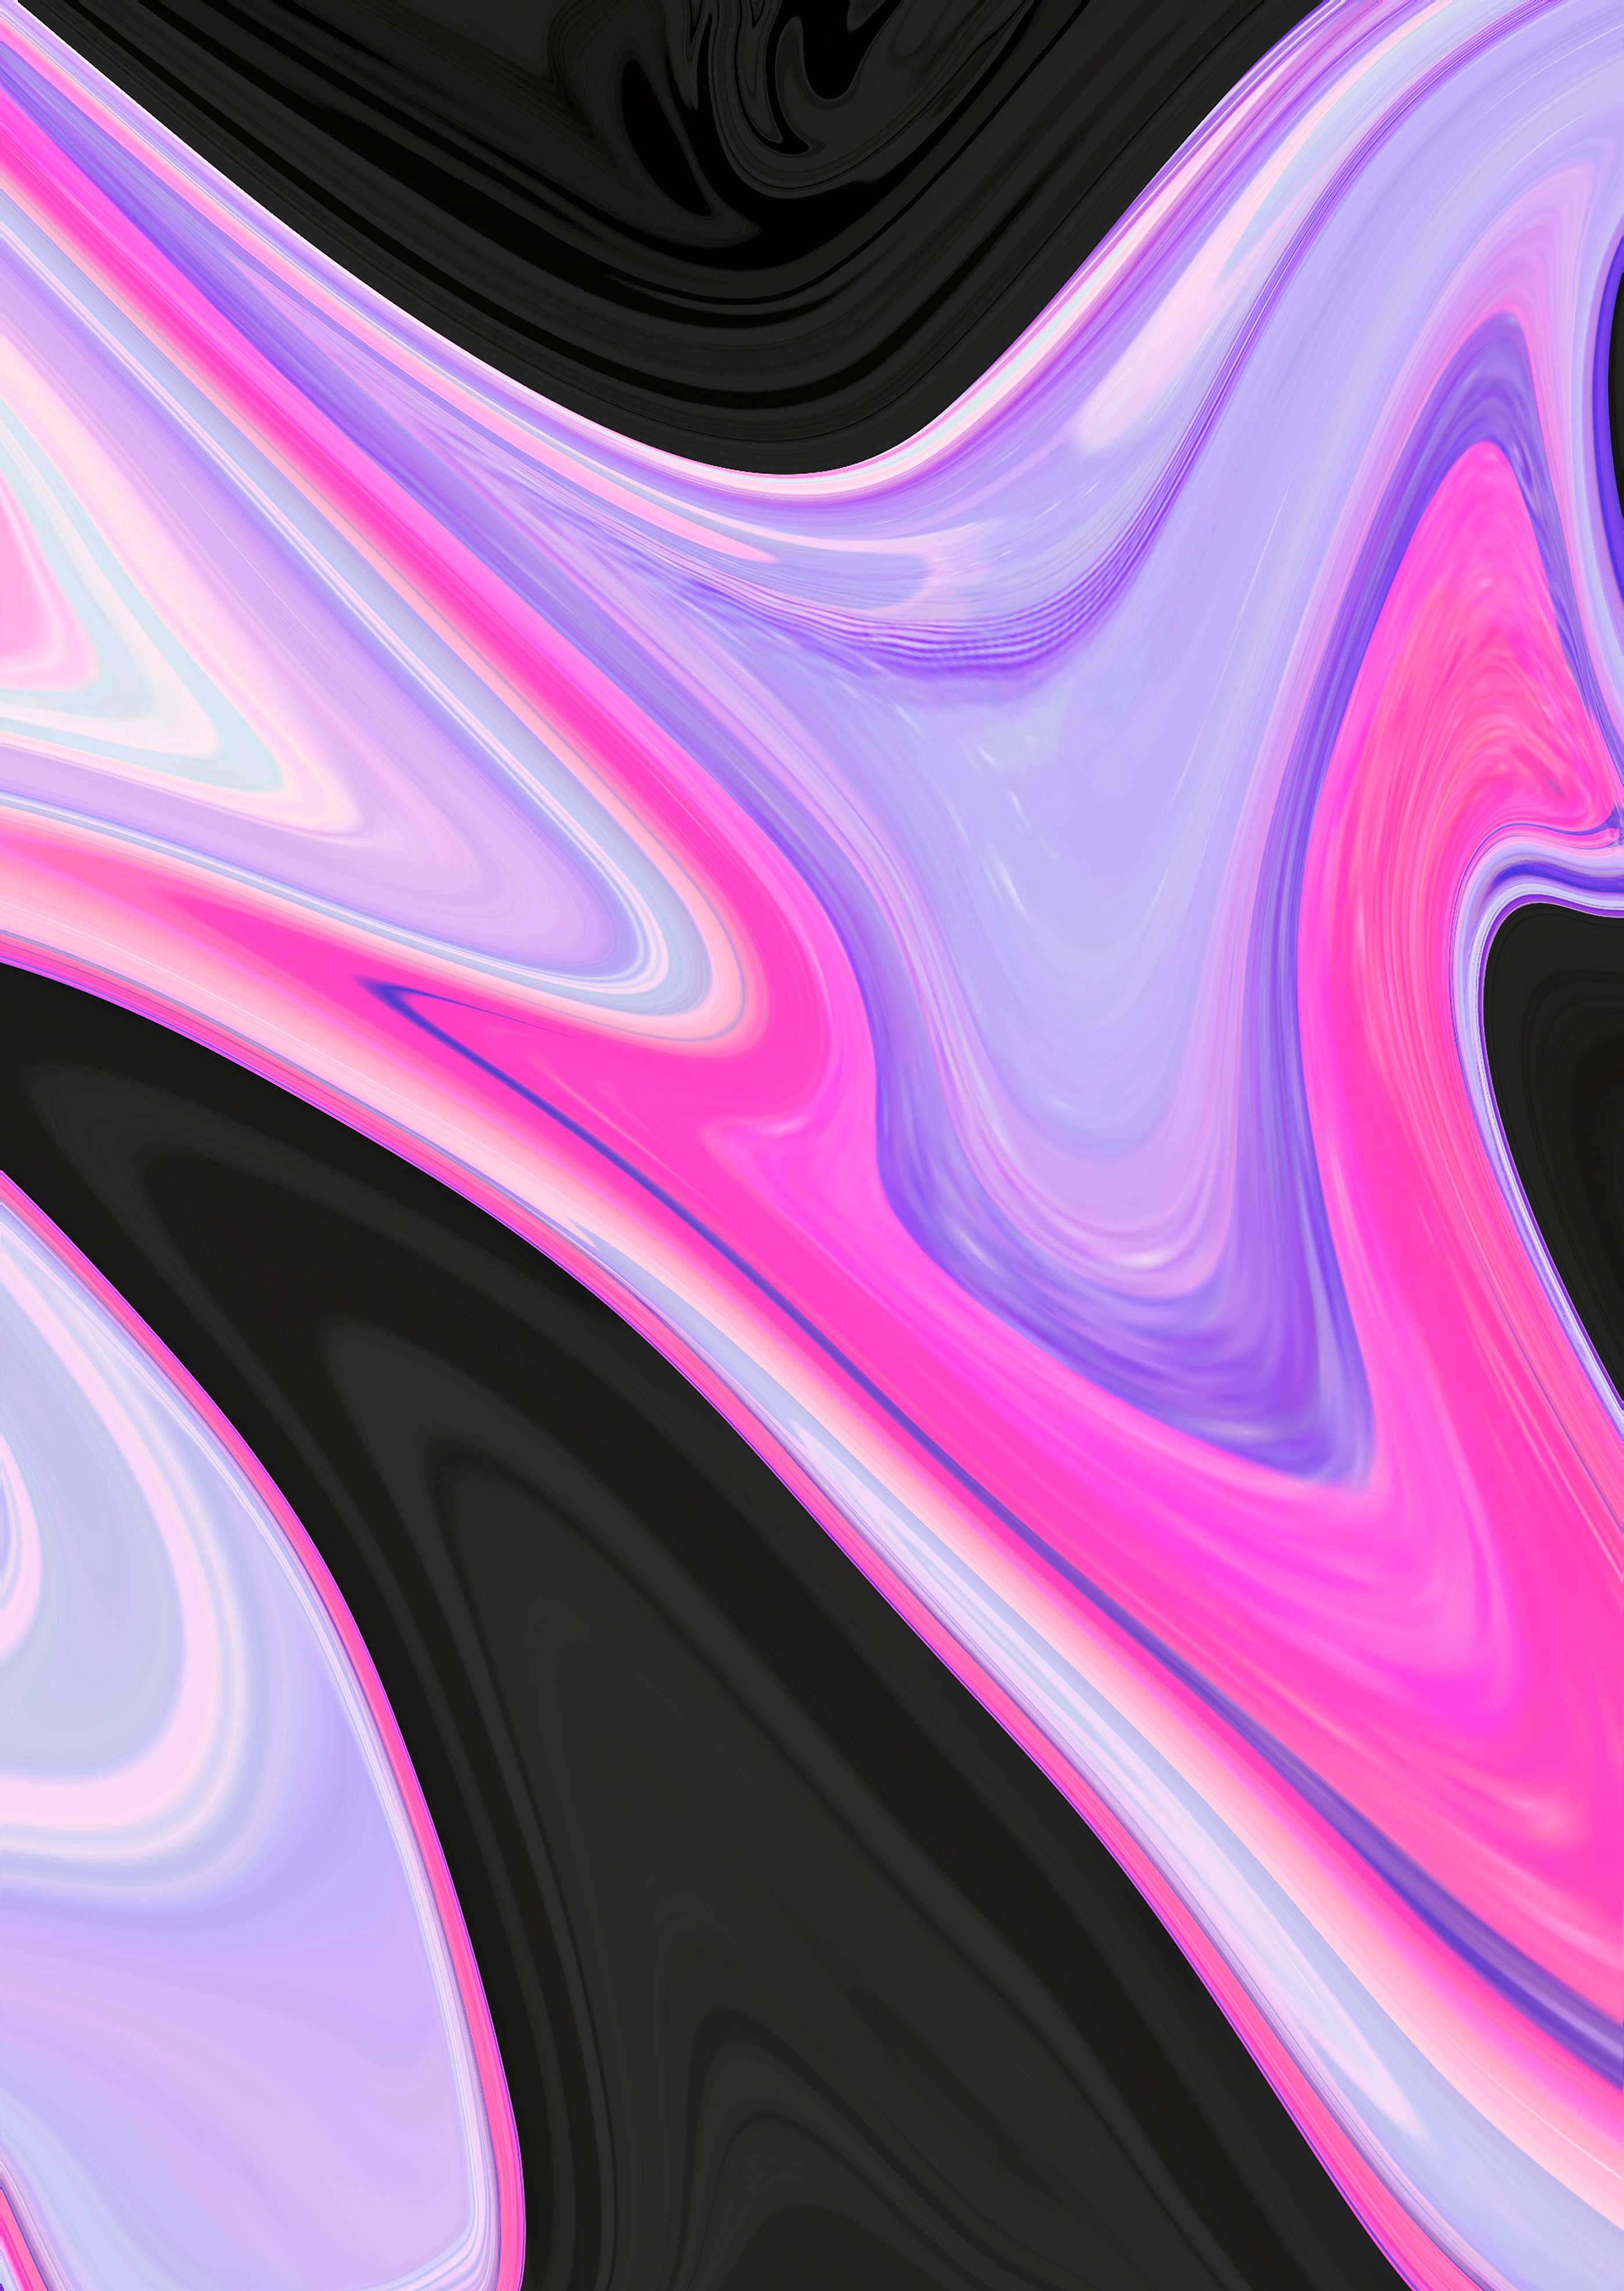 wavy, pink, abstract, black, lines, lilac, paint 2160p